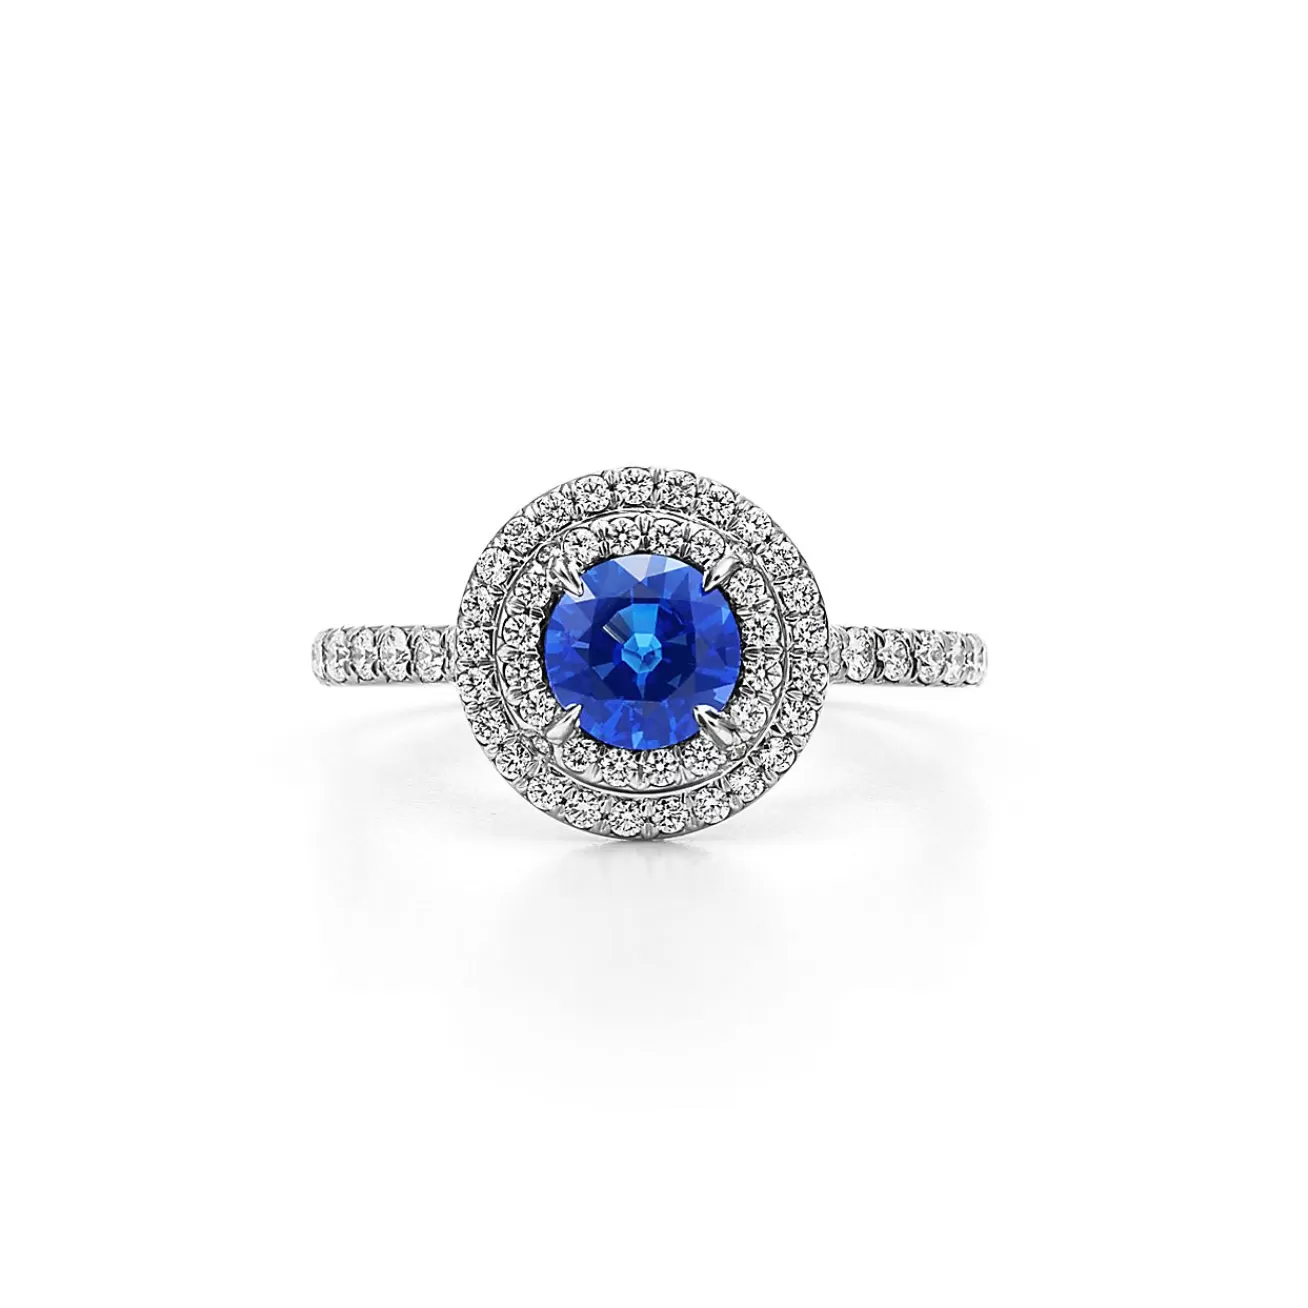 Tiffany & Co. Tiffany Soleste® ring in platinum with a .45-carat sapphire and diamonds. | ^ Rings | Platinum Jewelry